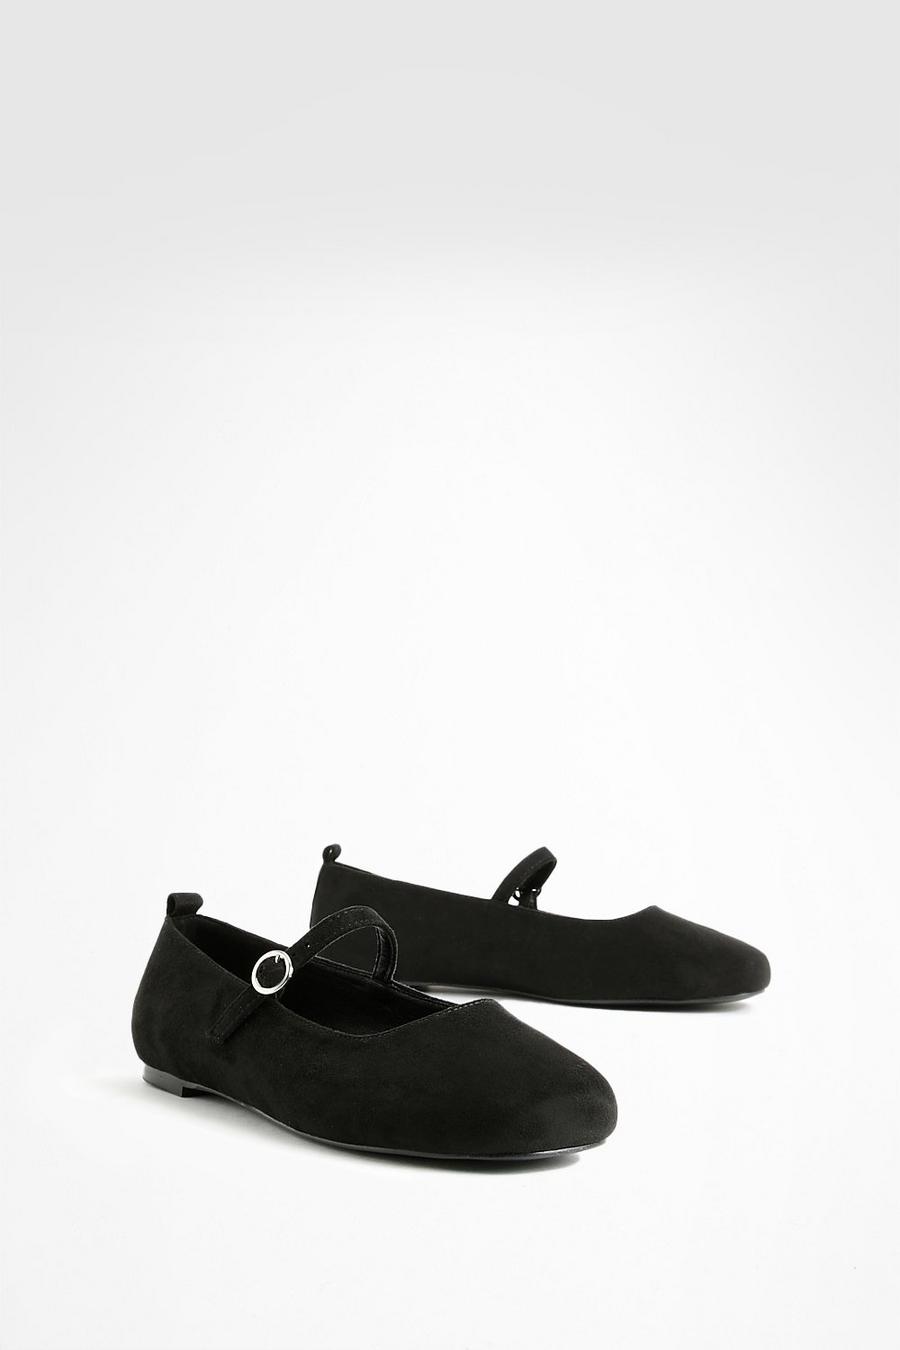 Black Wide Fit Strap Mary Jane Ballet Flats